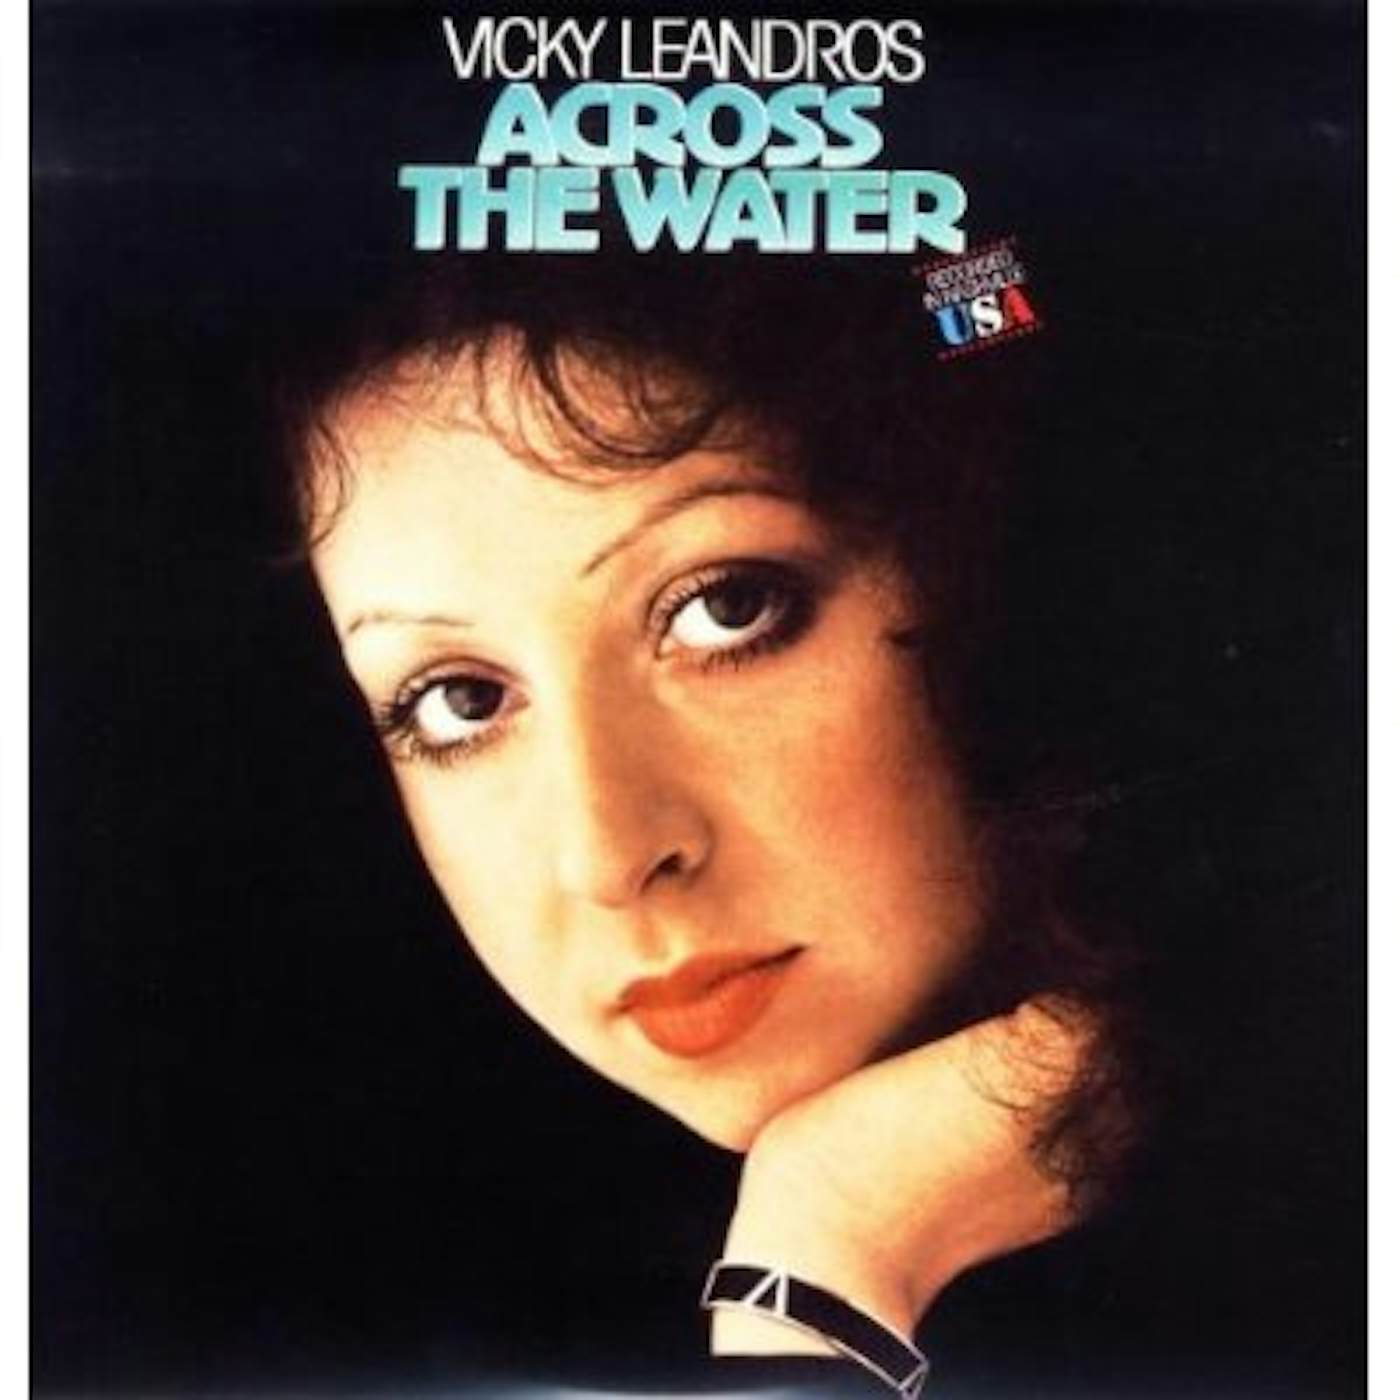 Vicky Leandros Across the Water Vinyl Record